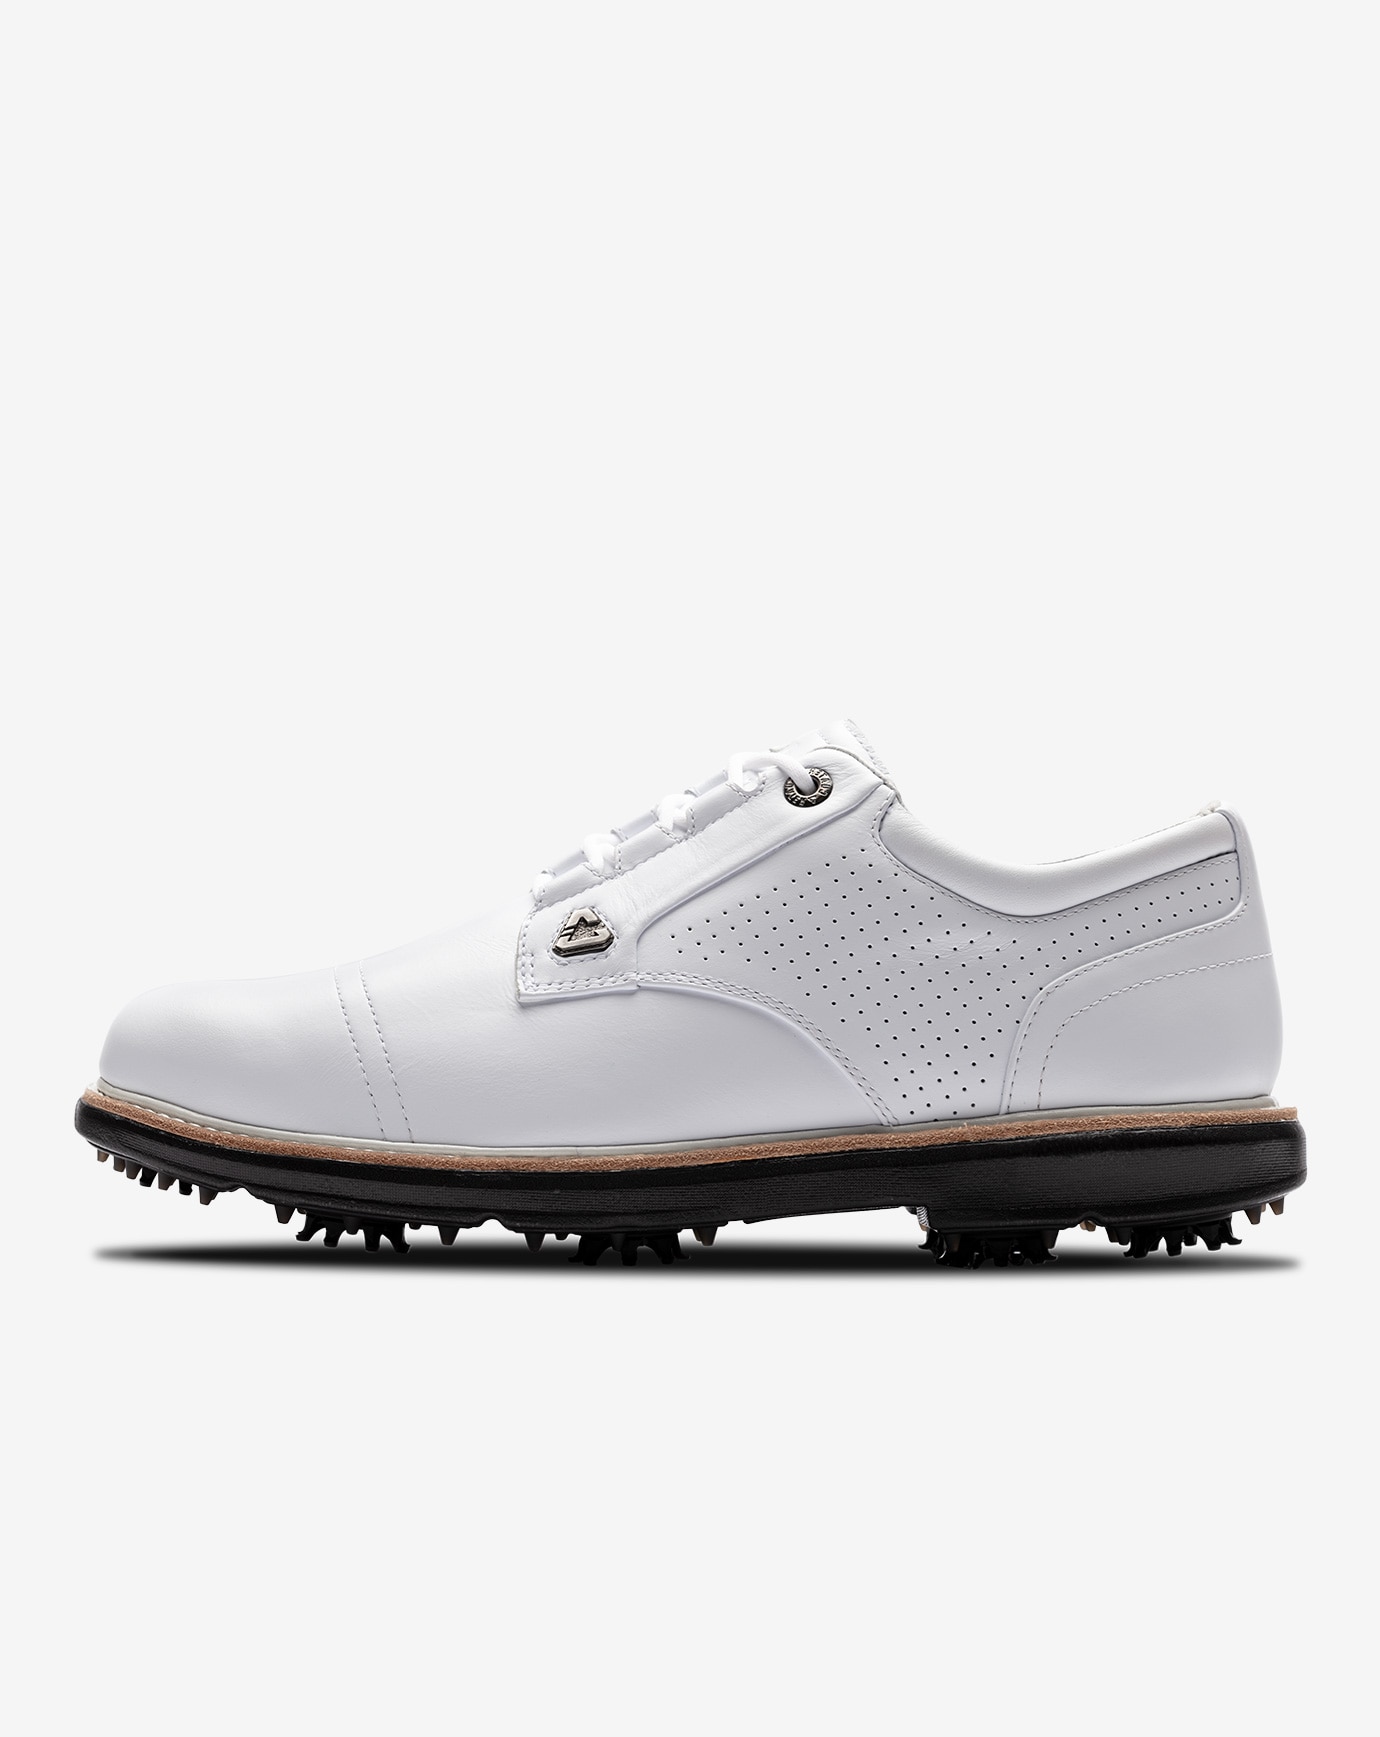 THE LEGEND SPIKED GOLF SHOE_4MR214_1WHT_